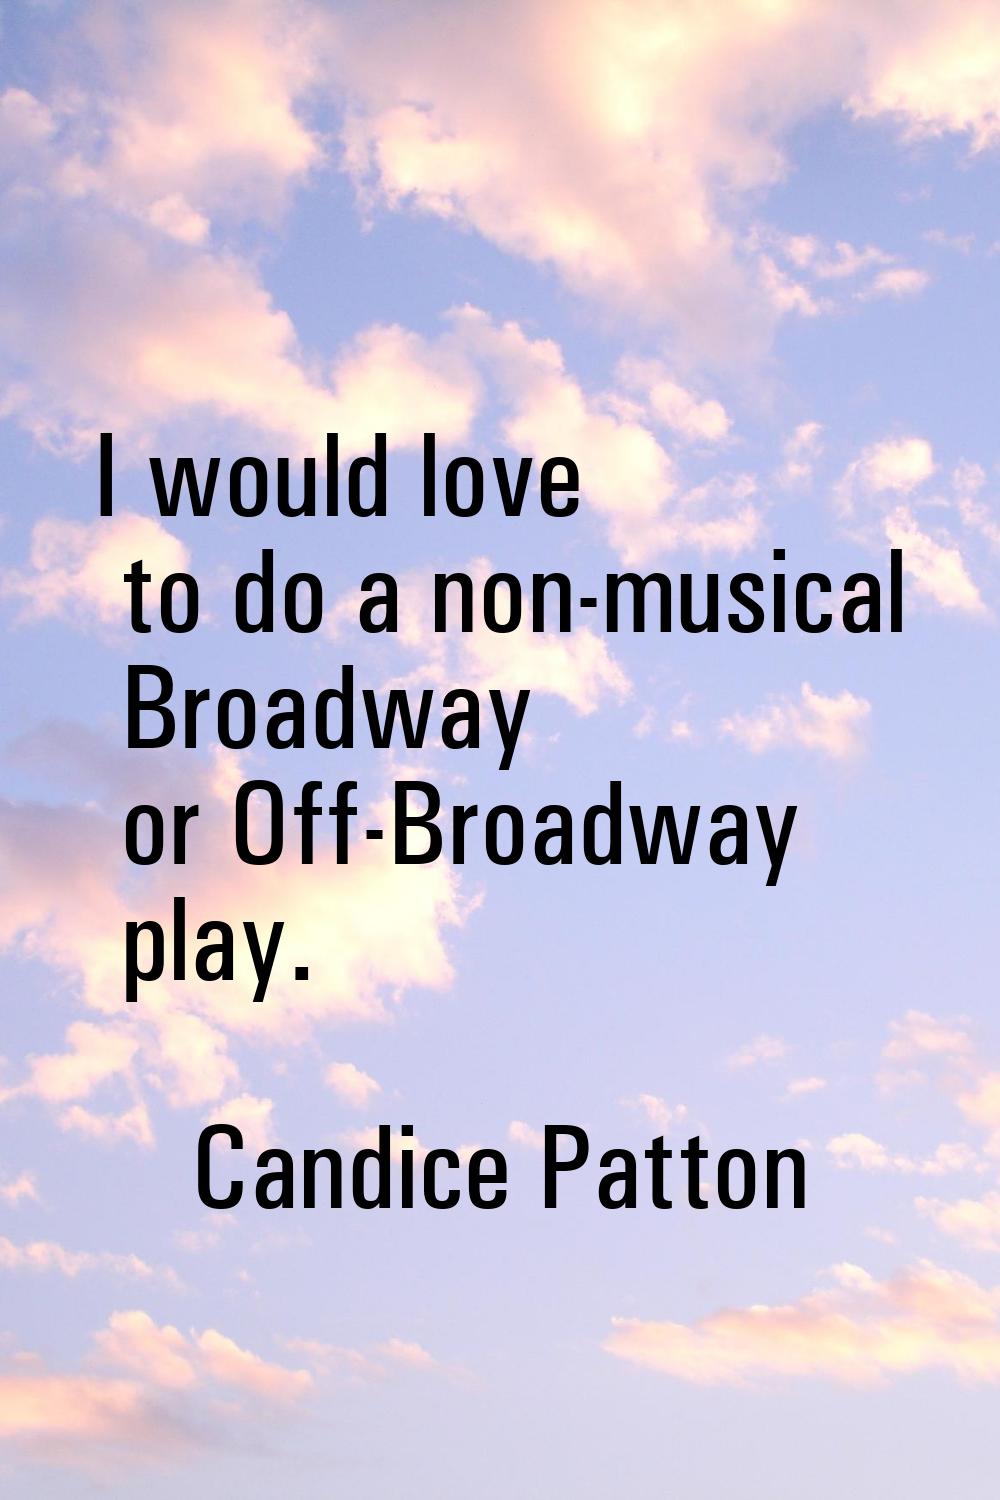 I would love to do a non-musical Broadway or Off-Broadway play.